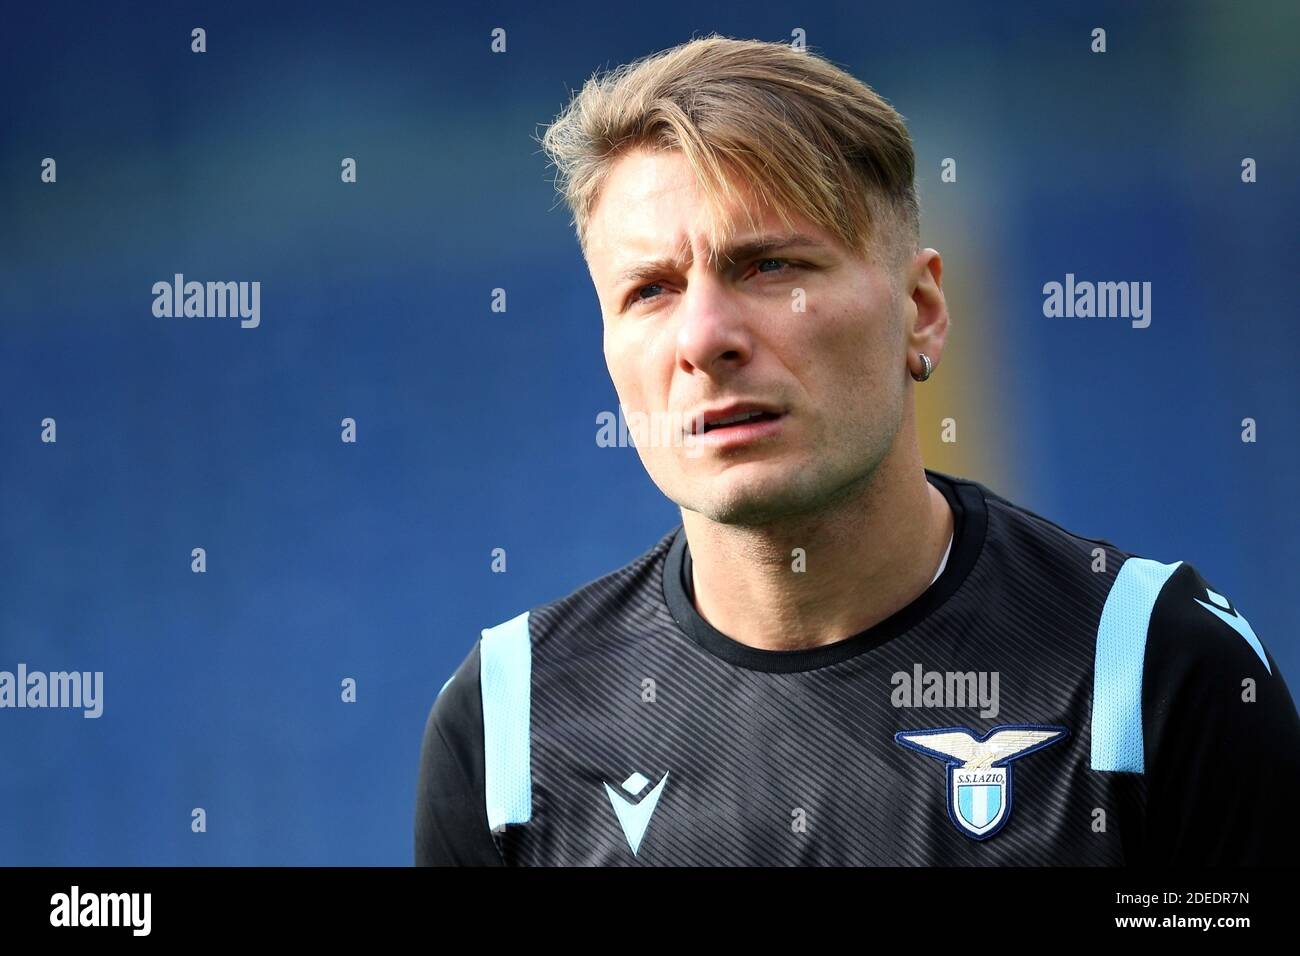 Ciro Immobile of Lazio reacts during warm up before during the Italian championship Serie A football match between SS Lazio / LM Stock Photo